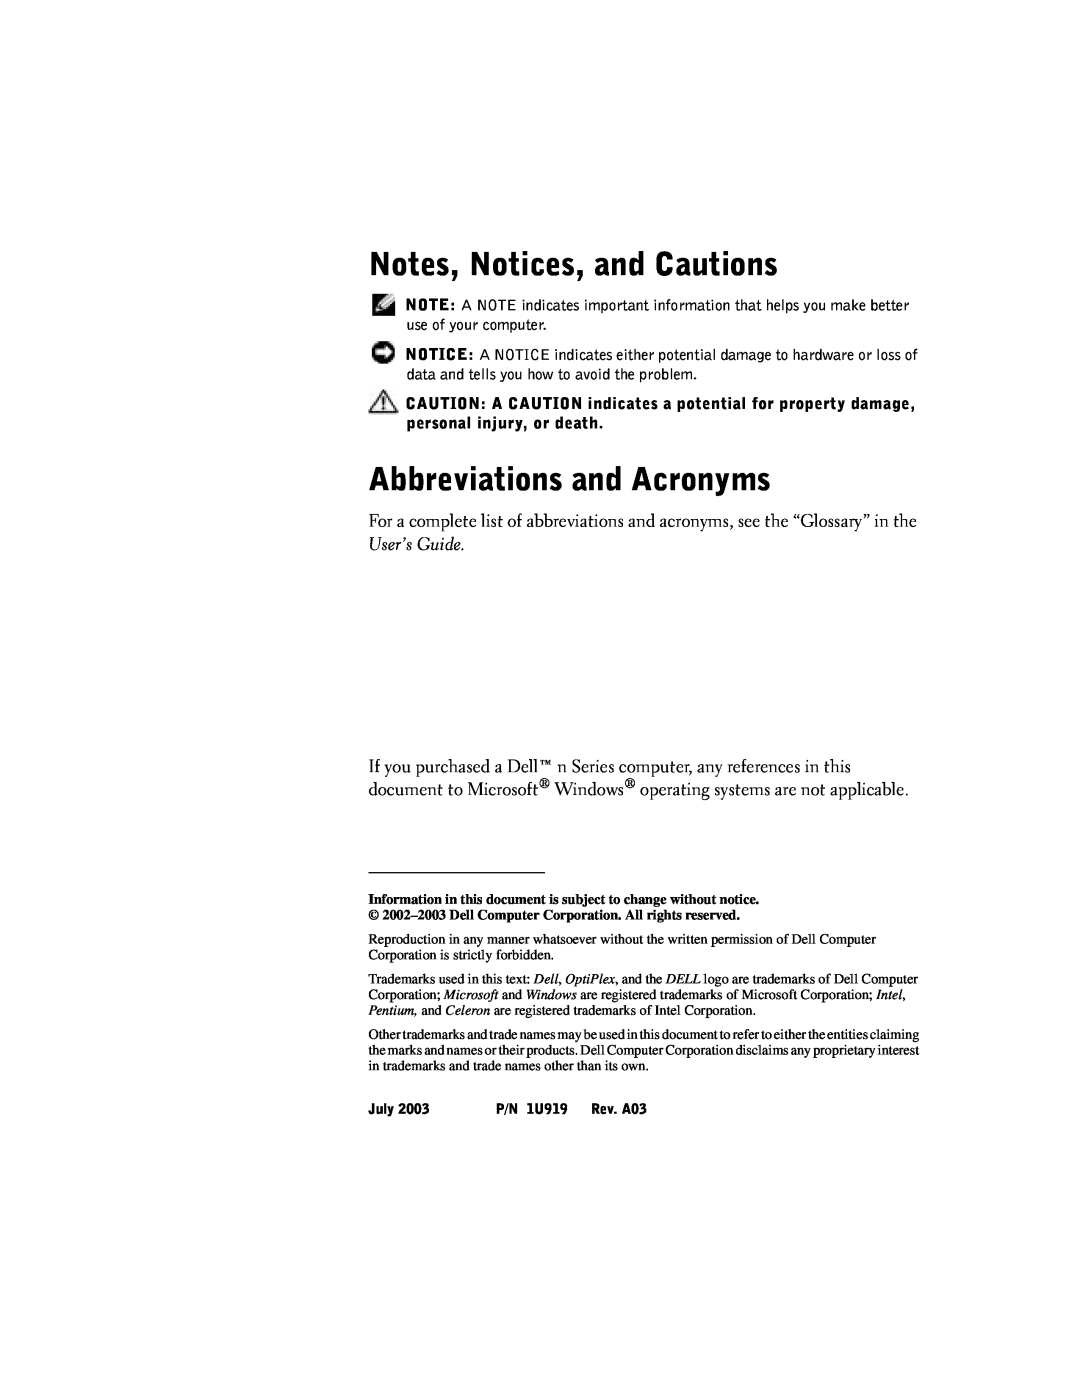 Dell SX manual Notes, Notices, and Cautions, Abbreviations and Acronyms, User’s Guide 